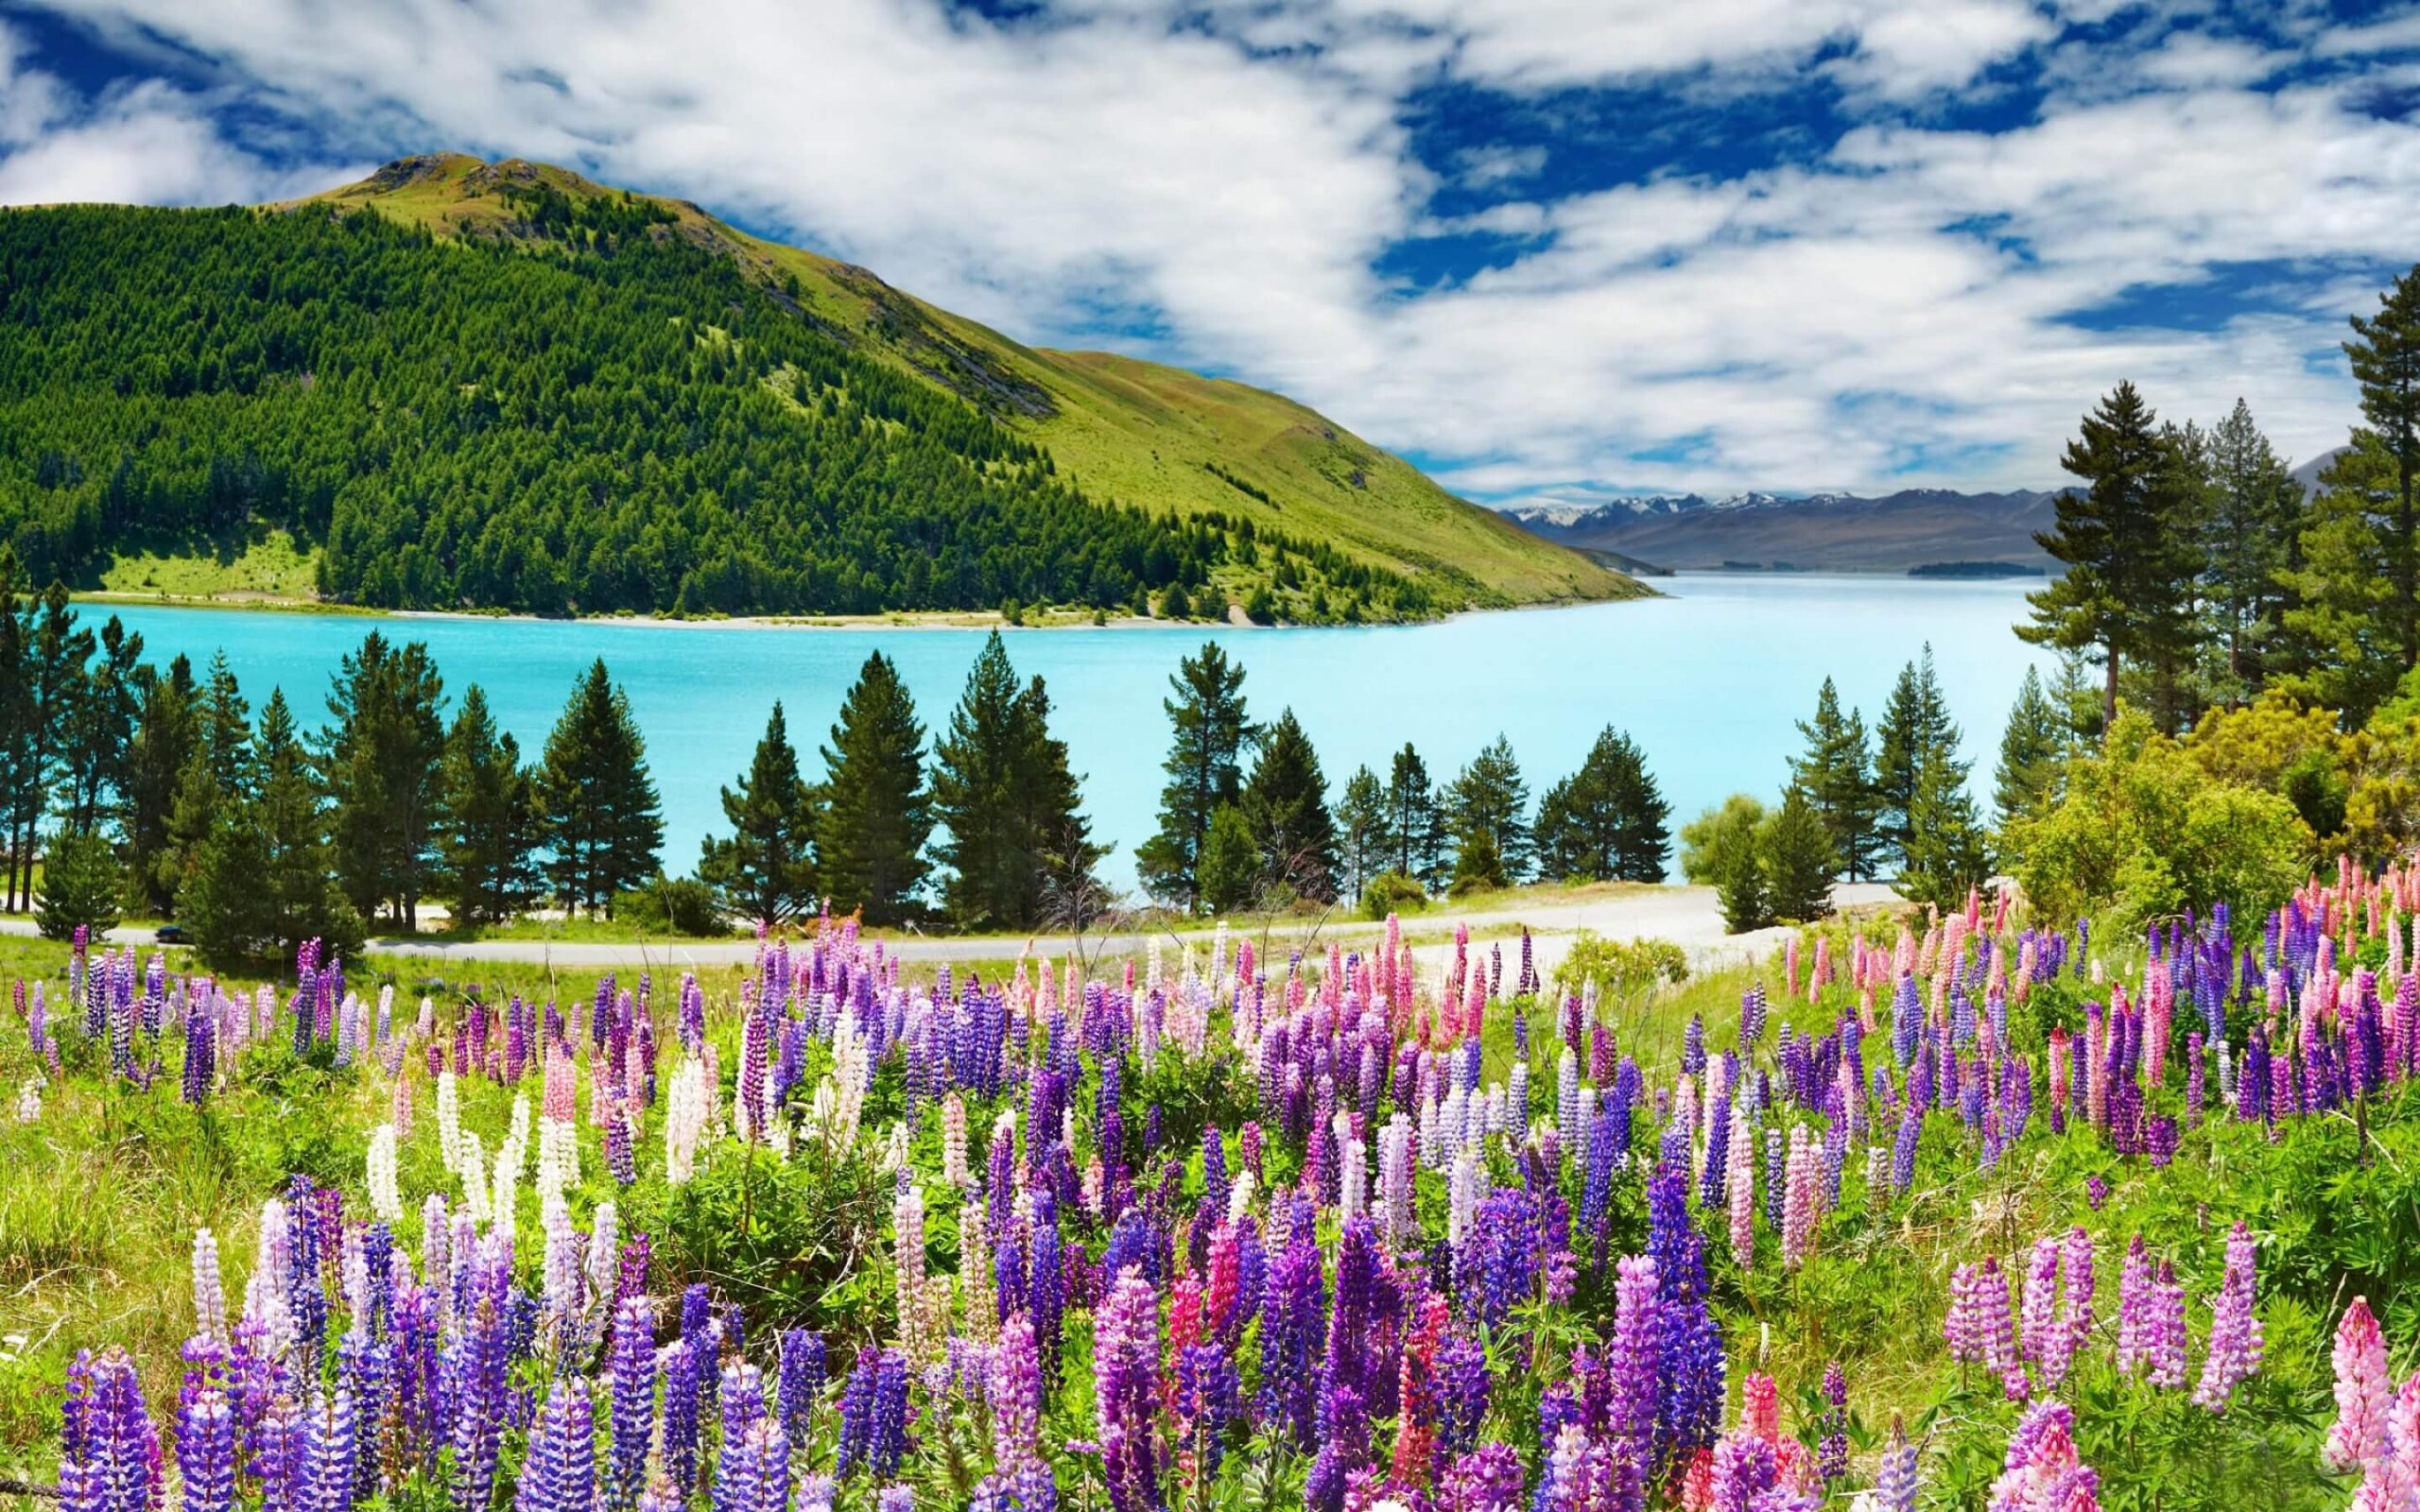 New Zealand 5 Star New Year Holiday Travel & Tour Package